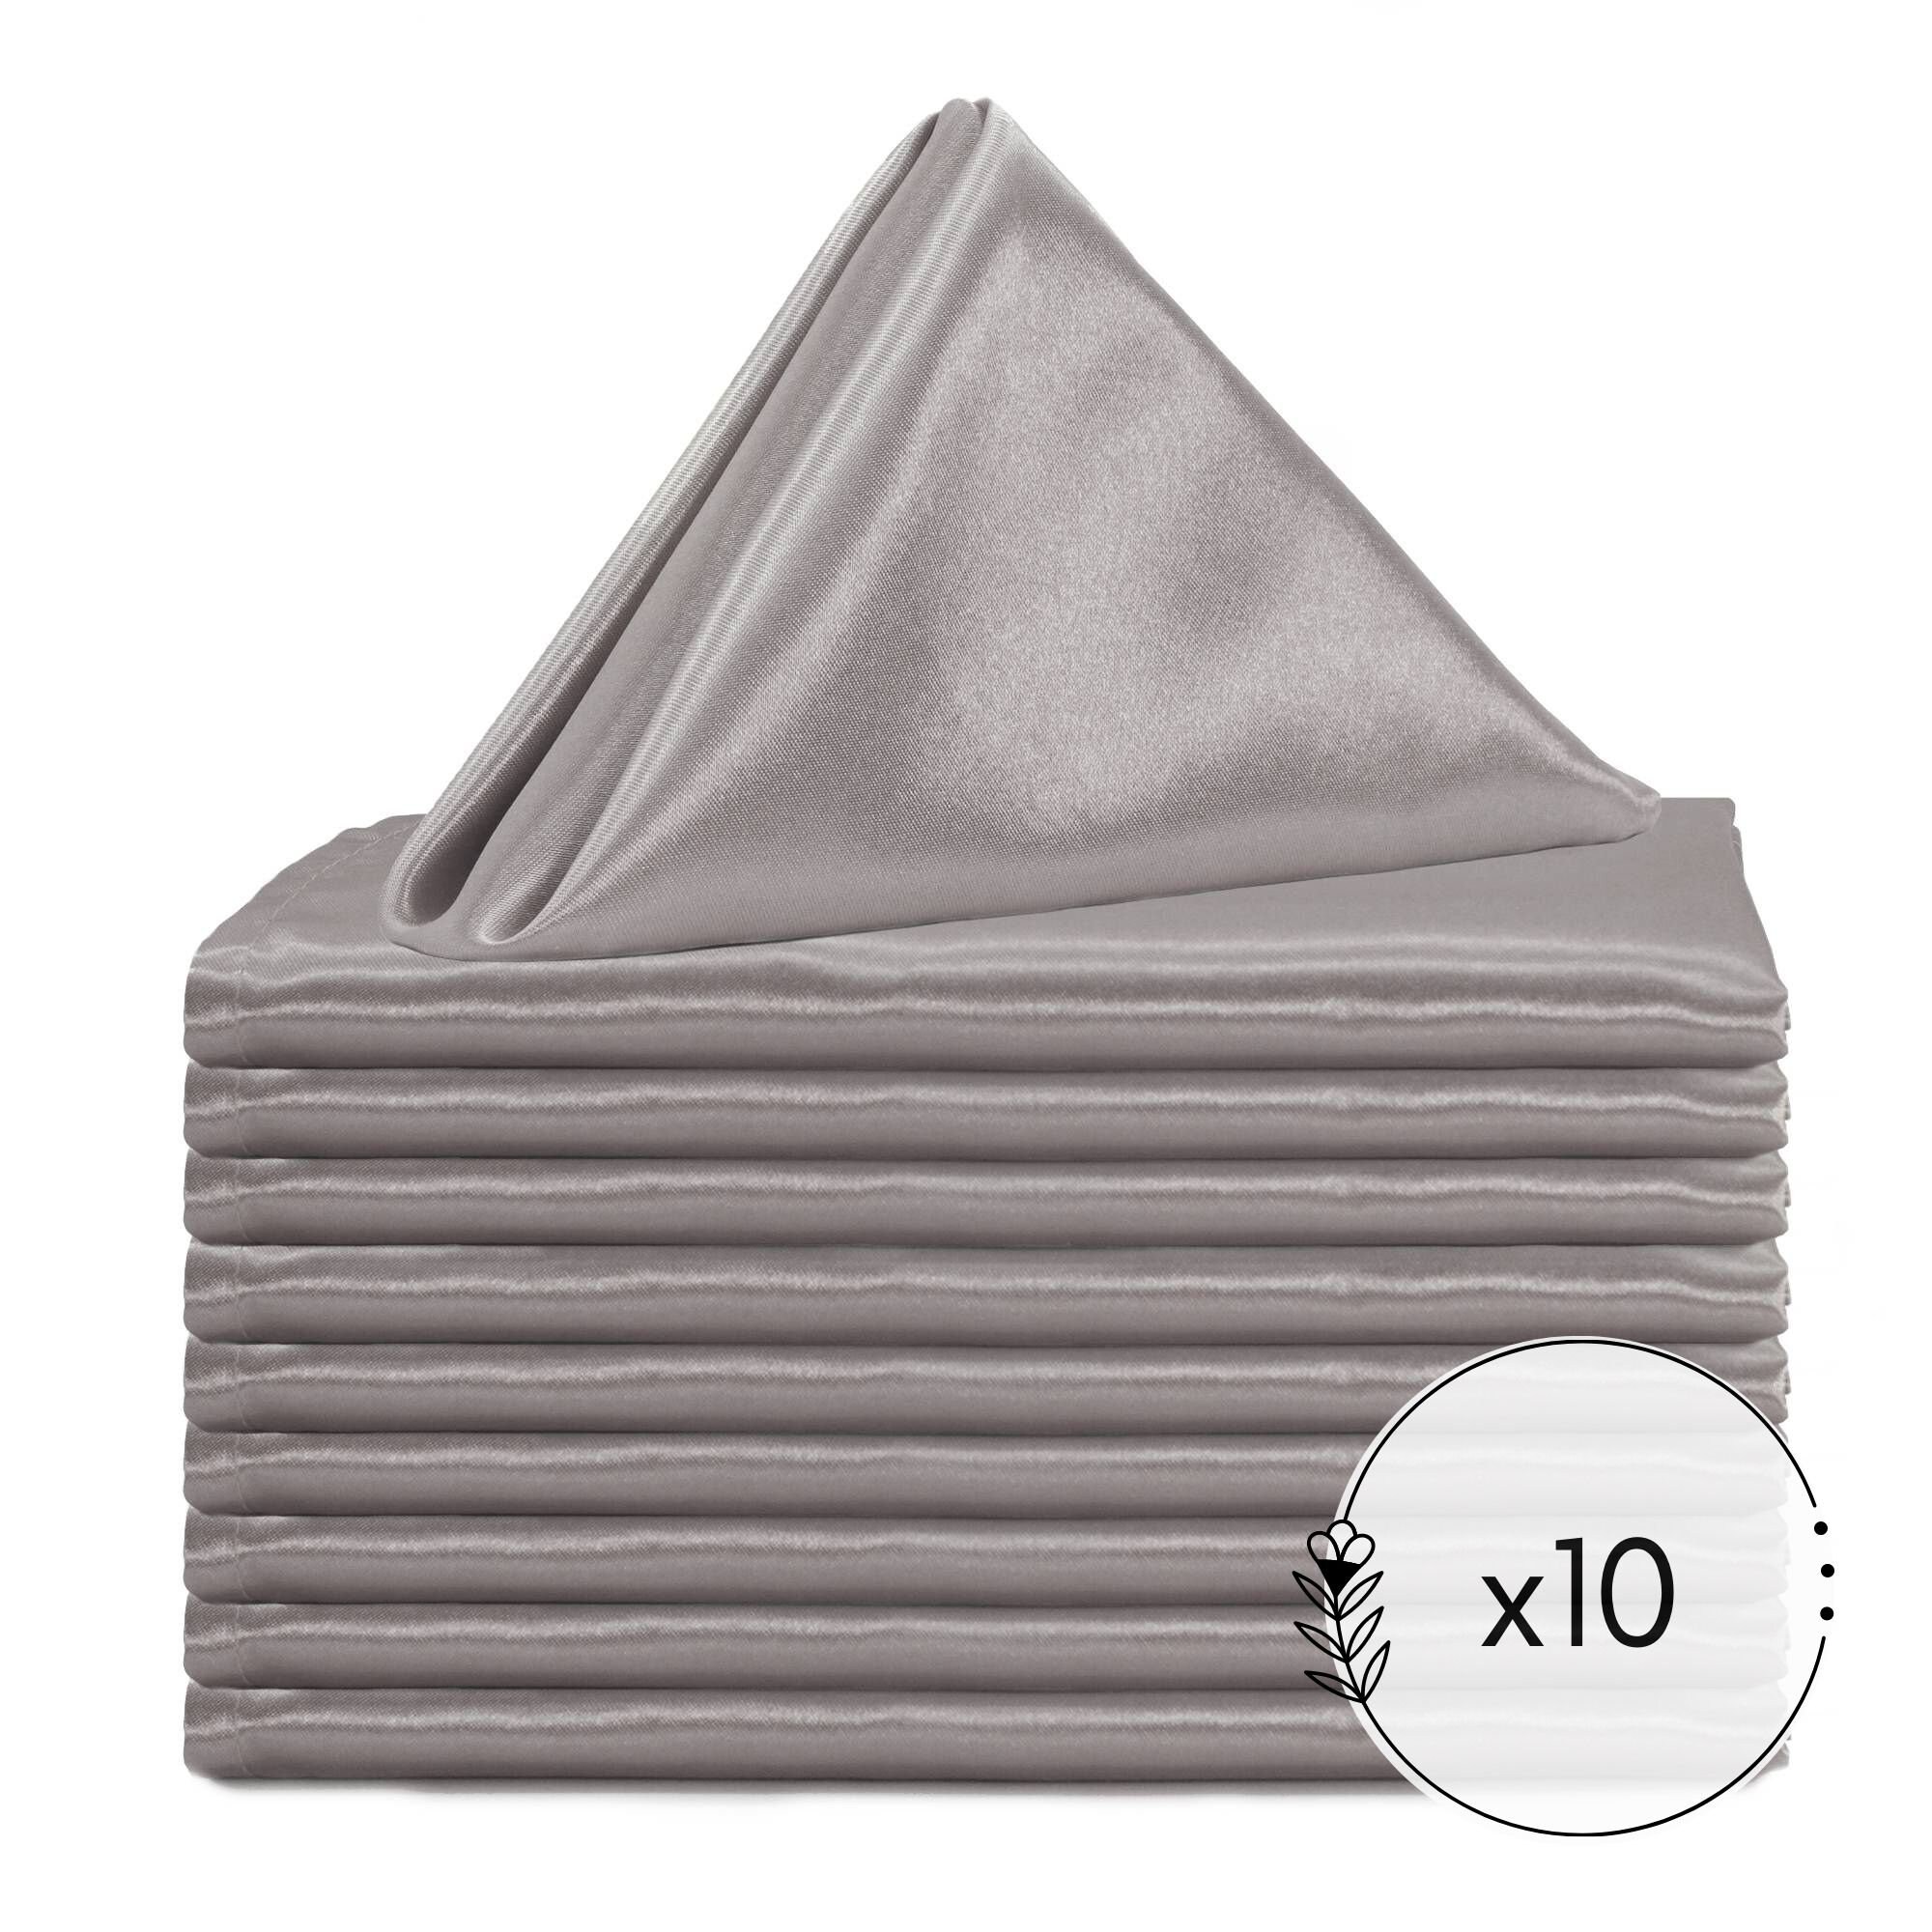 Your Chair Covers - 10 Pack 20 inch Satin Cloth Napkins Dark Silver/Gray/White Striped